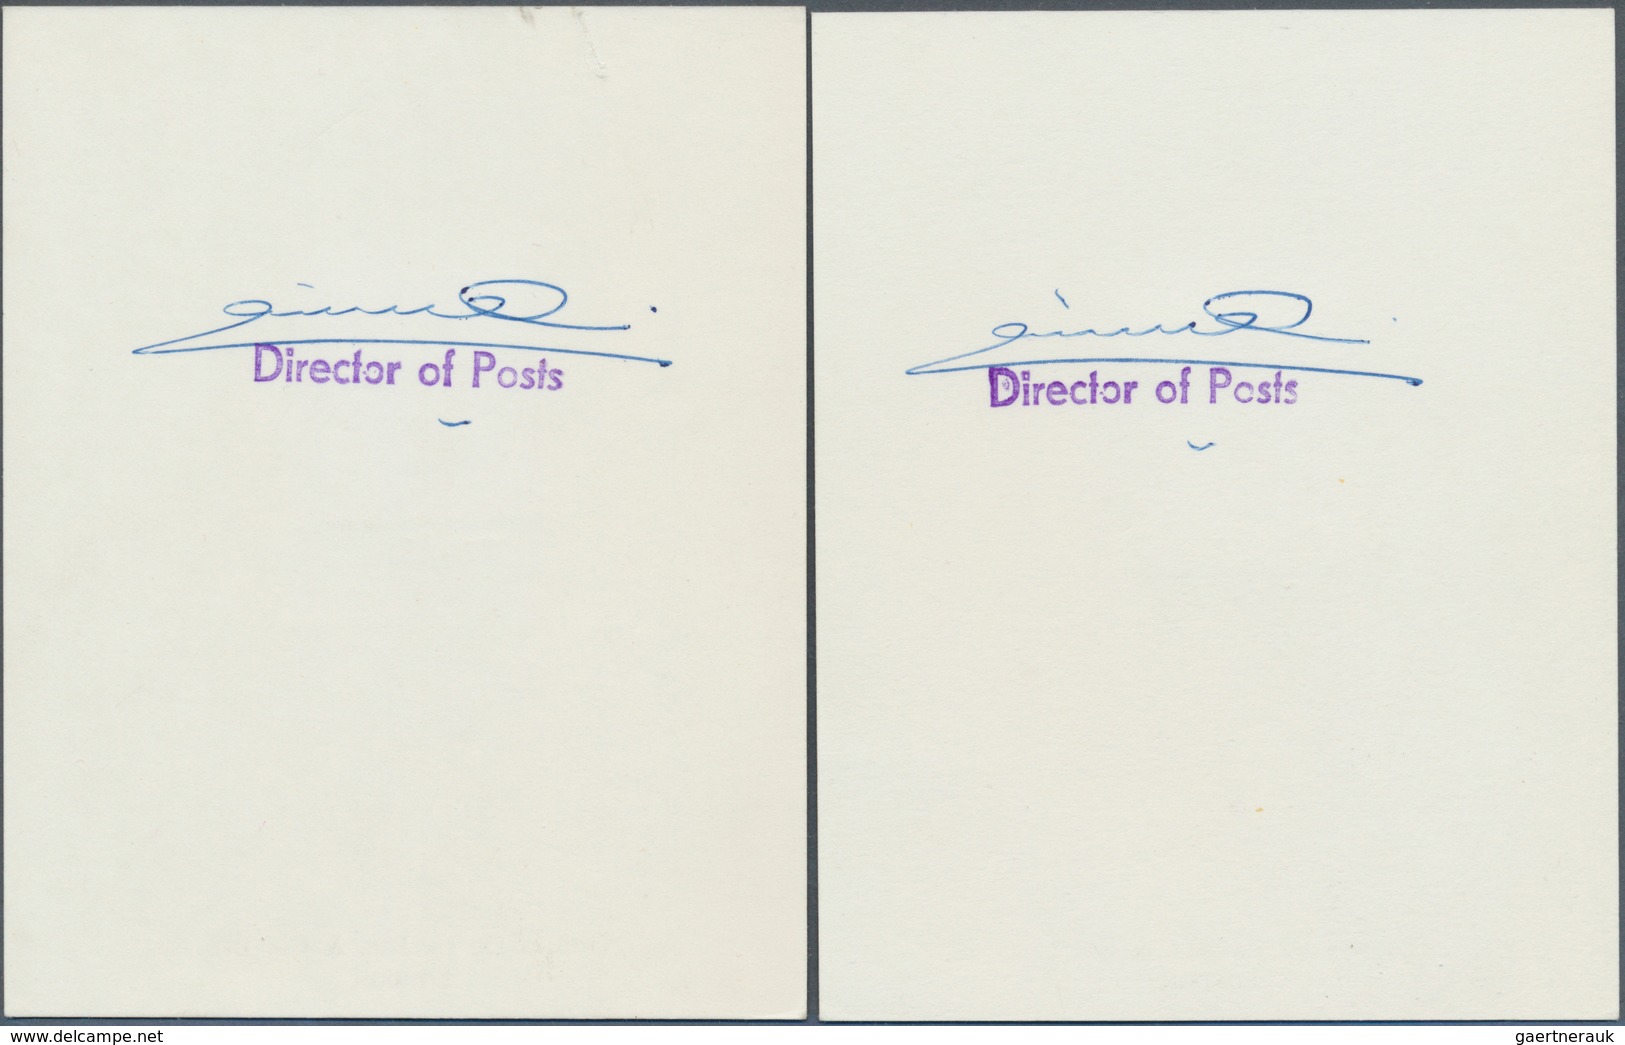 09253 Kuwait: 1969, Amir Sheikh Sabah issue 8f-90f. Imperforate final proofs, as submitted and approved, o